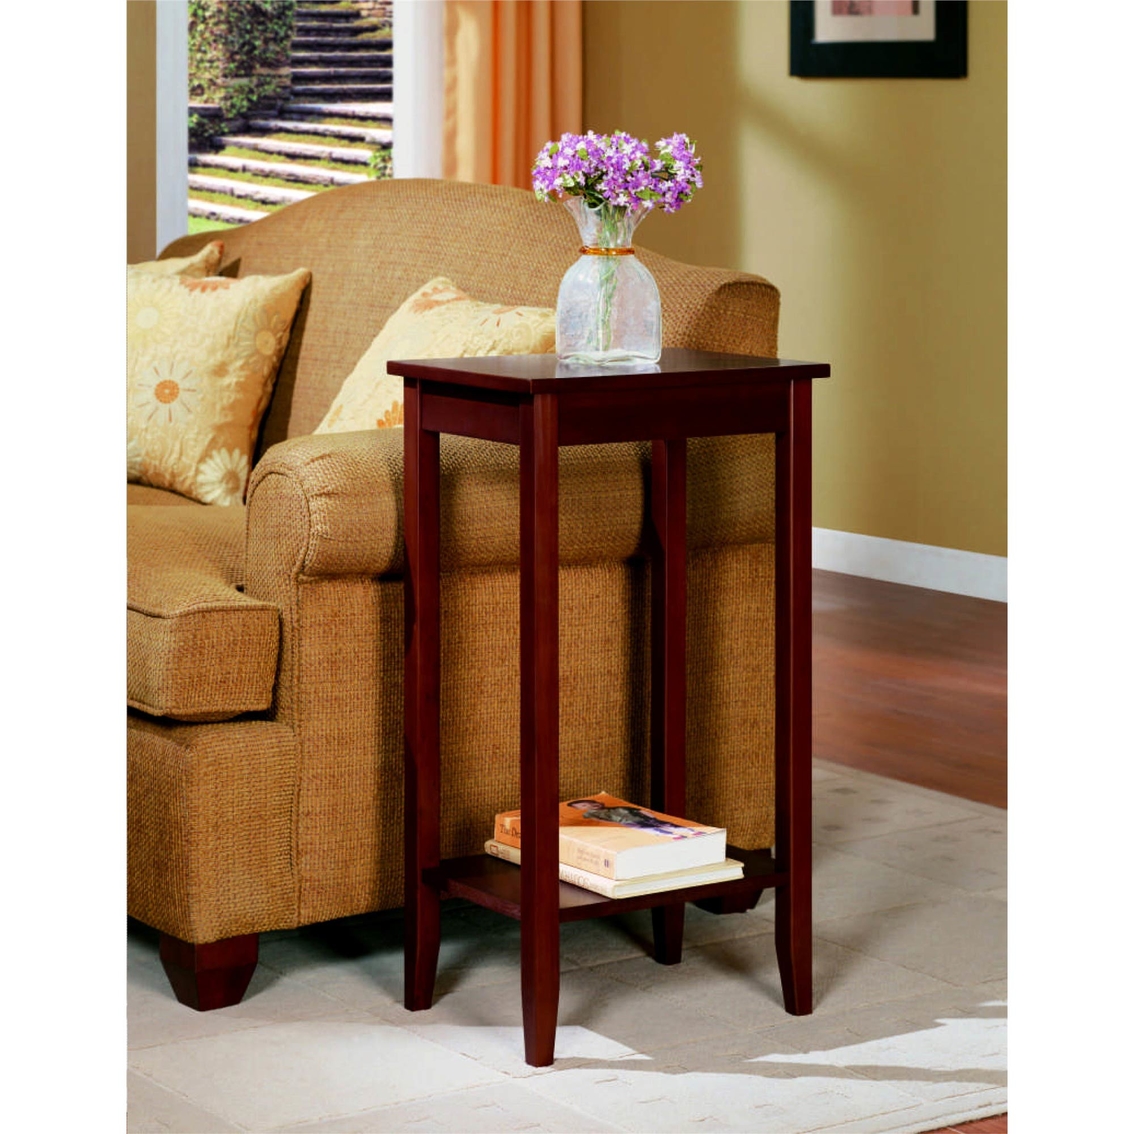 DHP Rosewood Tall End Table - Image 2 of 2